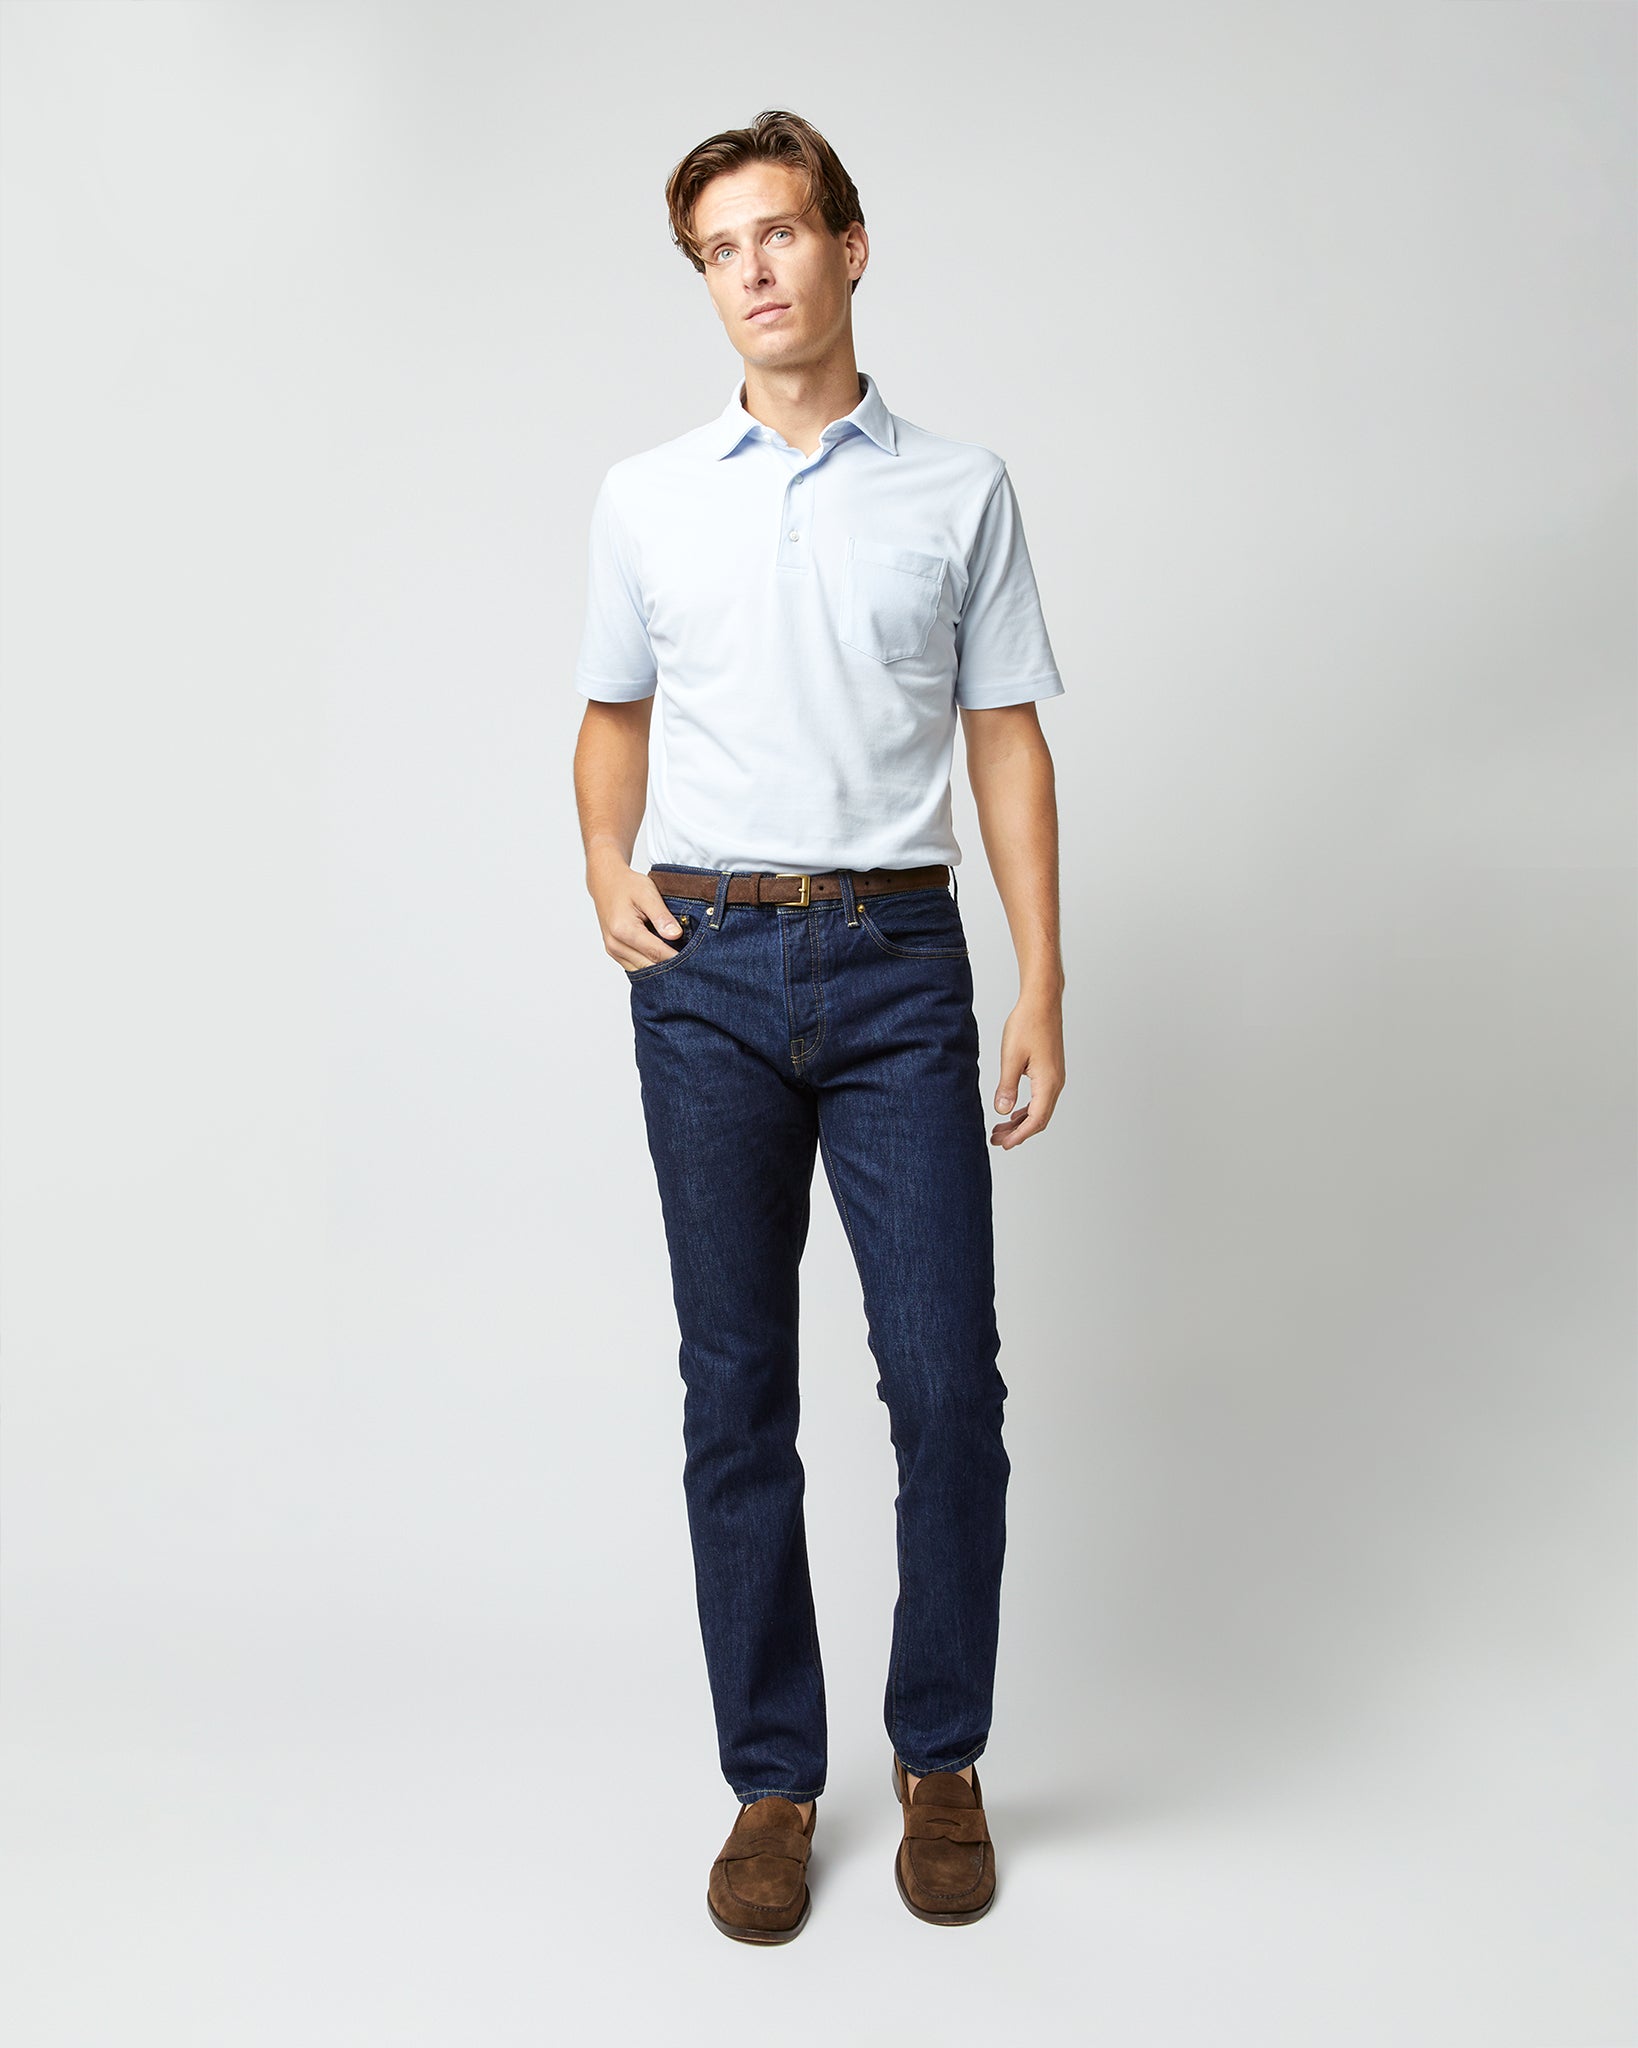 Short-Sleeved Polo in Pale Blue Pima Pique